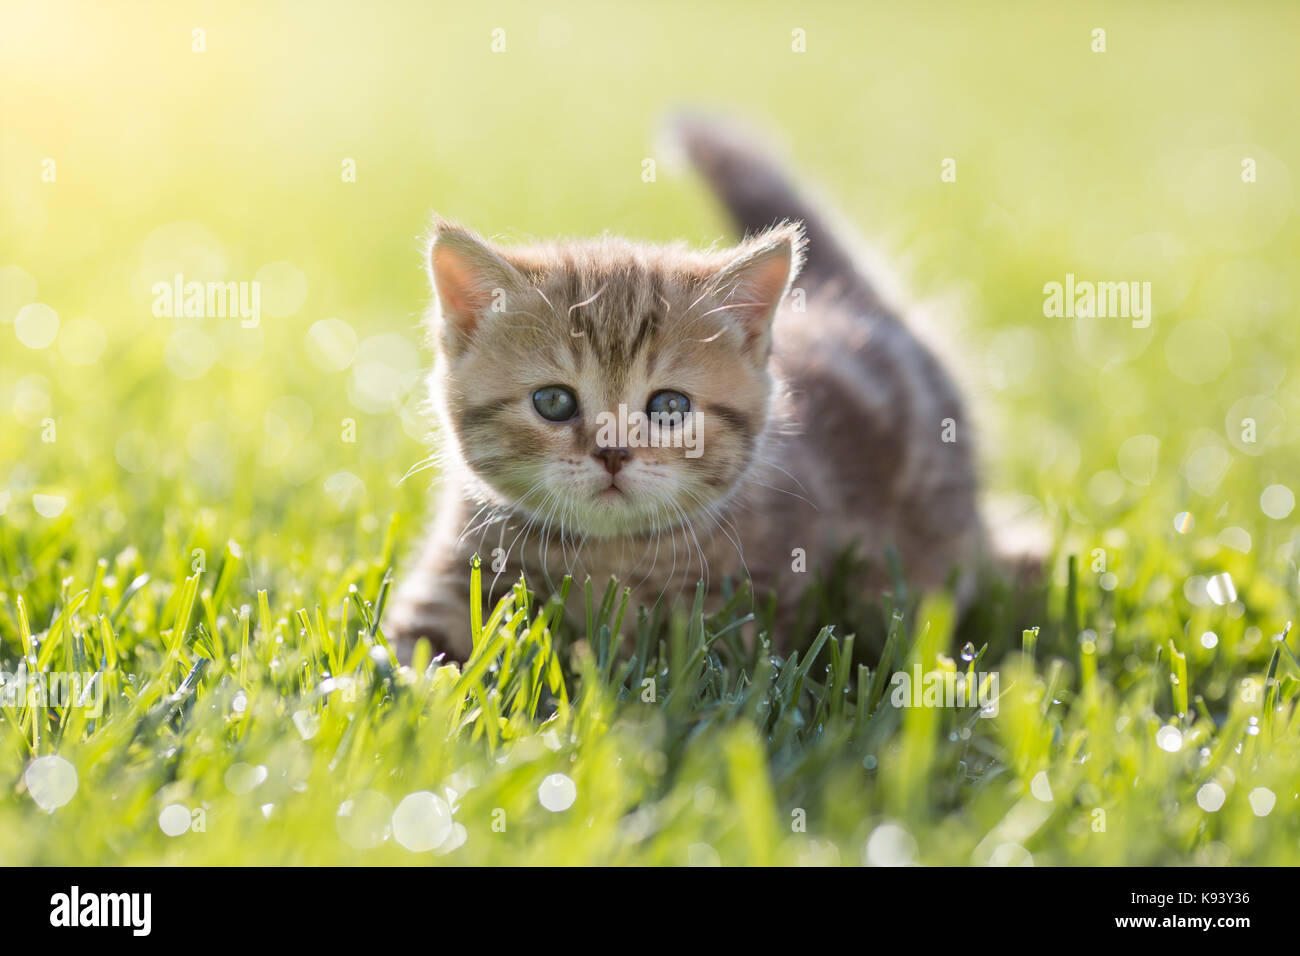 baby cat in green grass outdoor Stock Photo